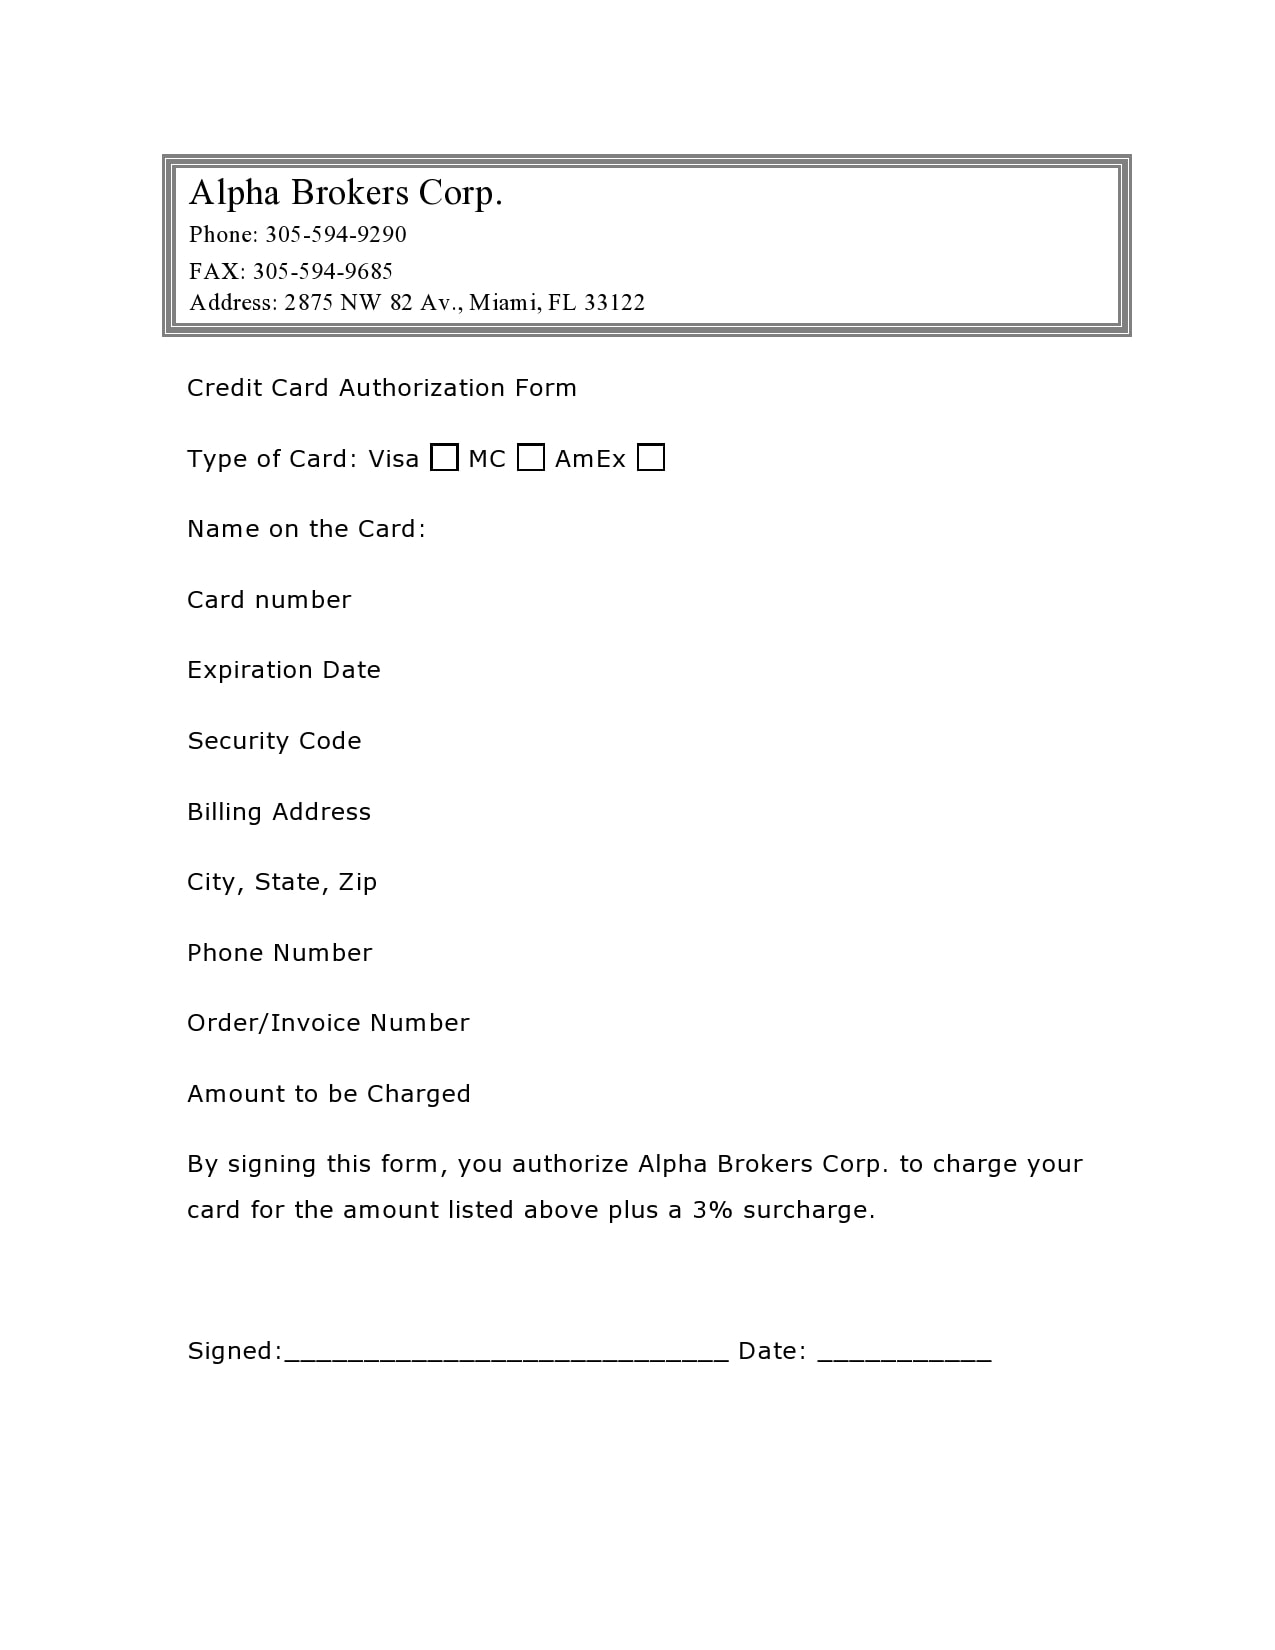 credit card authorization form template 08